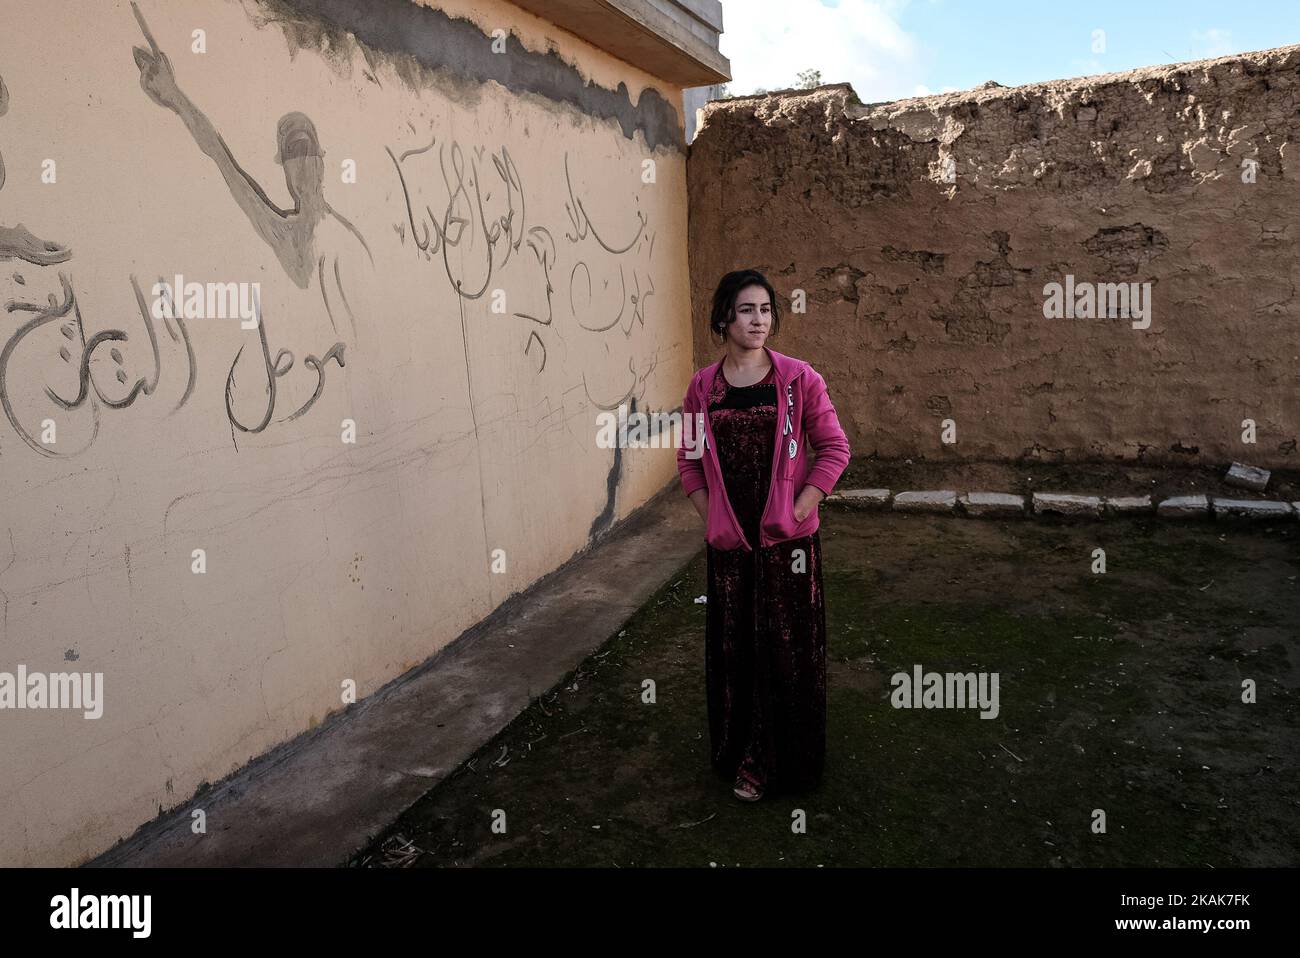 January 2017, Wardak, Iraq. ISIL graffiti. The KakaÂ’i Kurds are returning to their homes as Mosul offensive continiues. The KakaÂ’i Kurds are one of several multi-ethnic groups who are part of the Yarsan or Ahl el-Haqq (people of truth), a religion founded by Sultan Sahak in the late 14th century in western Iran. Some Yarsanis in Iraq are called the KakaÂ’is. The Kakais are one of the religious minorities scattered throughout northern Iraq in the provinces of Sulaimaniyah and Halabja, in the Ninevah Plains of Ninevah province and in villages to the southeast of Kirkuk. Historians and research Stock Photo